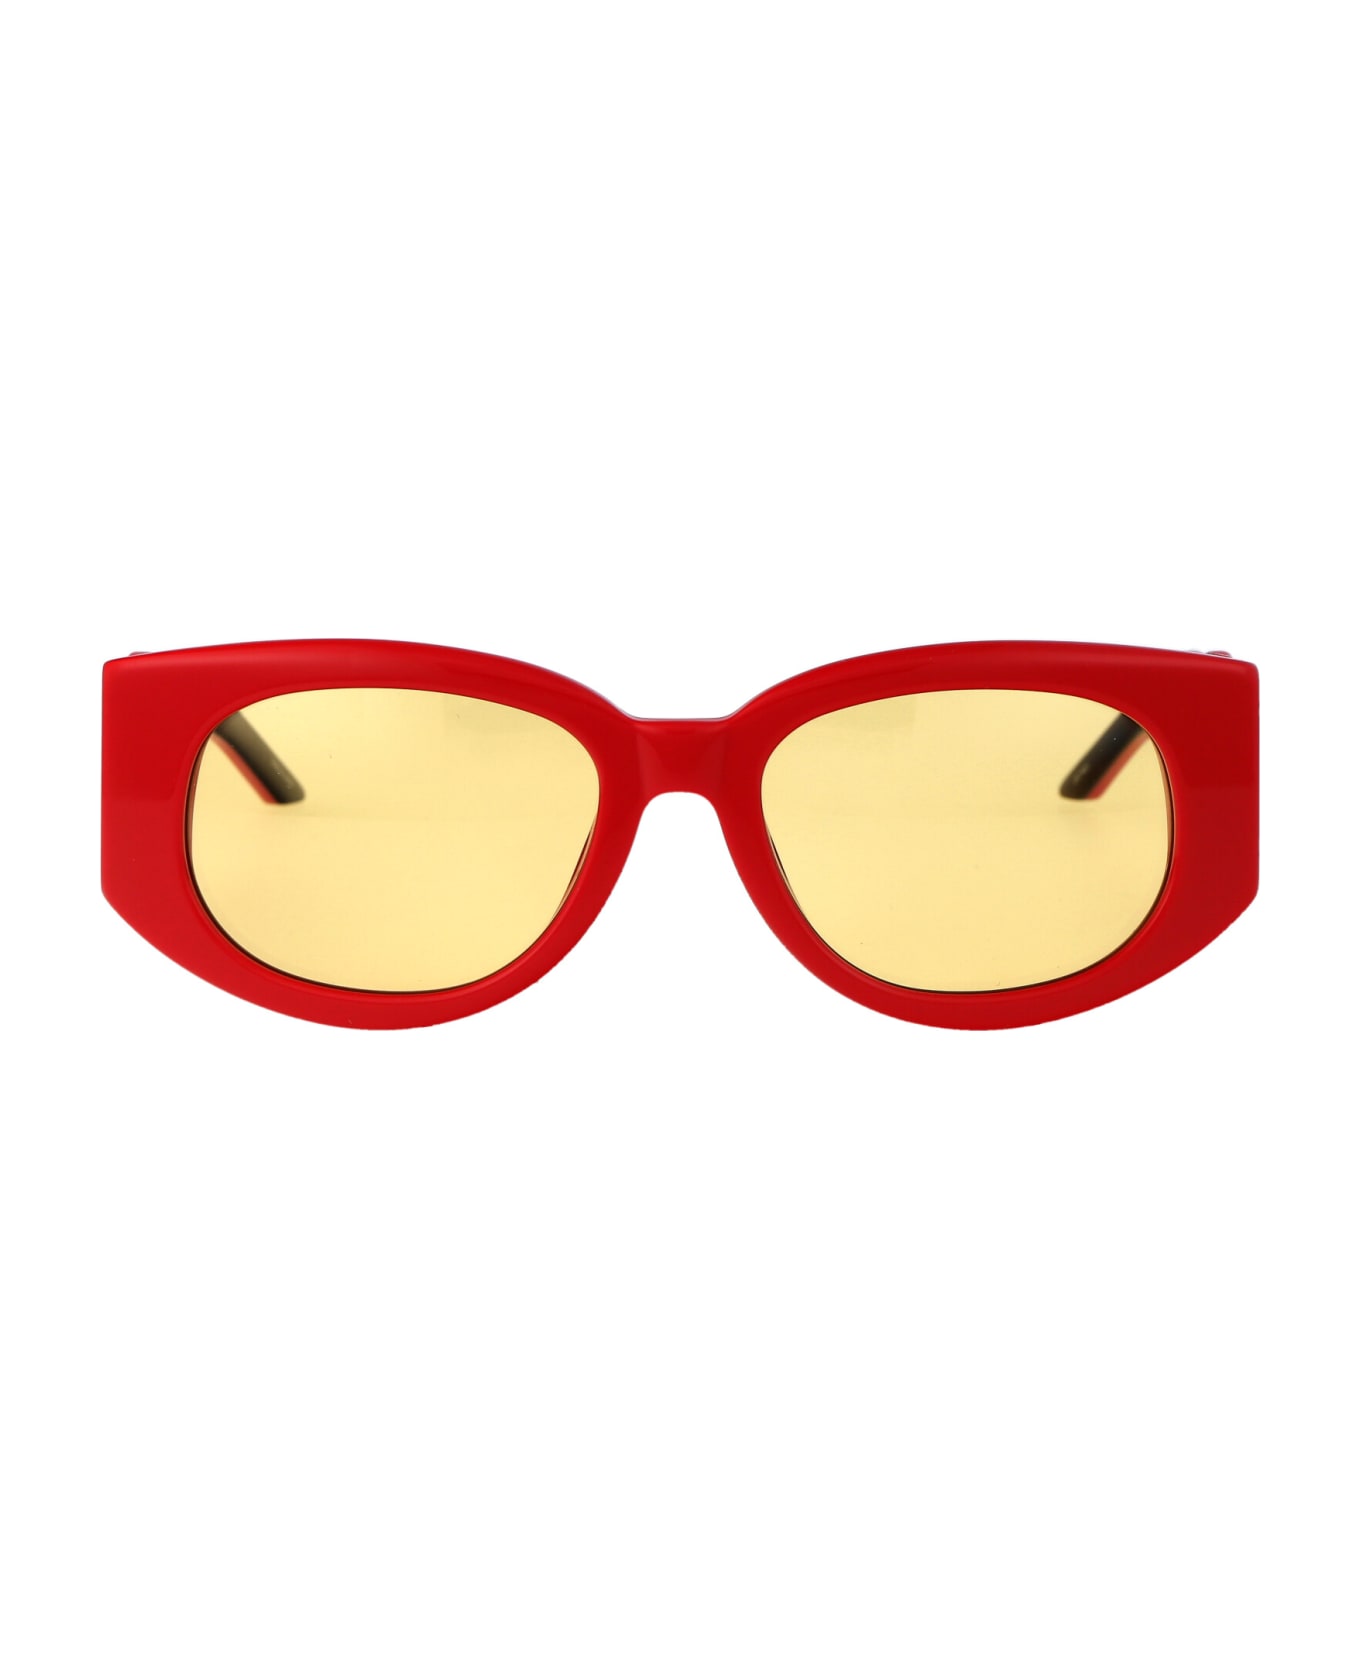 Casablanca As23-ew-020-04w Sunglasses - RED/YELLOW GOLD/CANARY